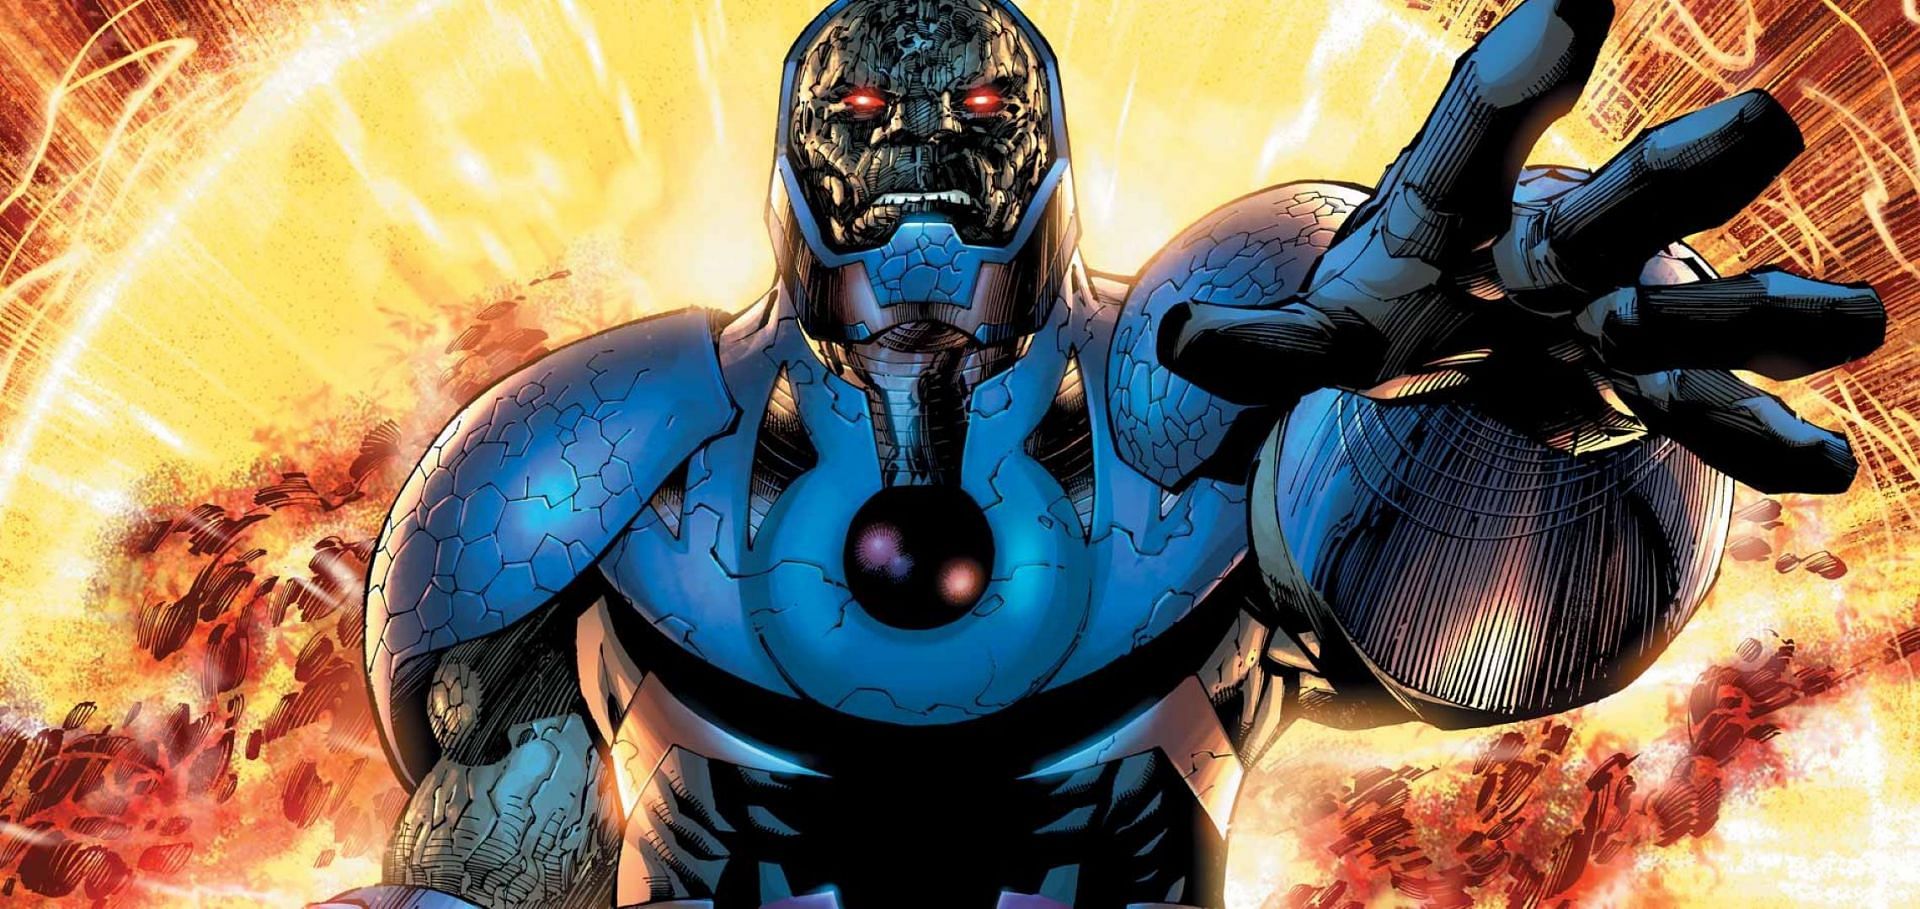 Darkseid fought Justice League several times (Image via DC)